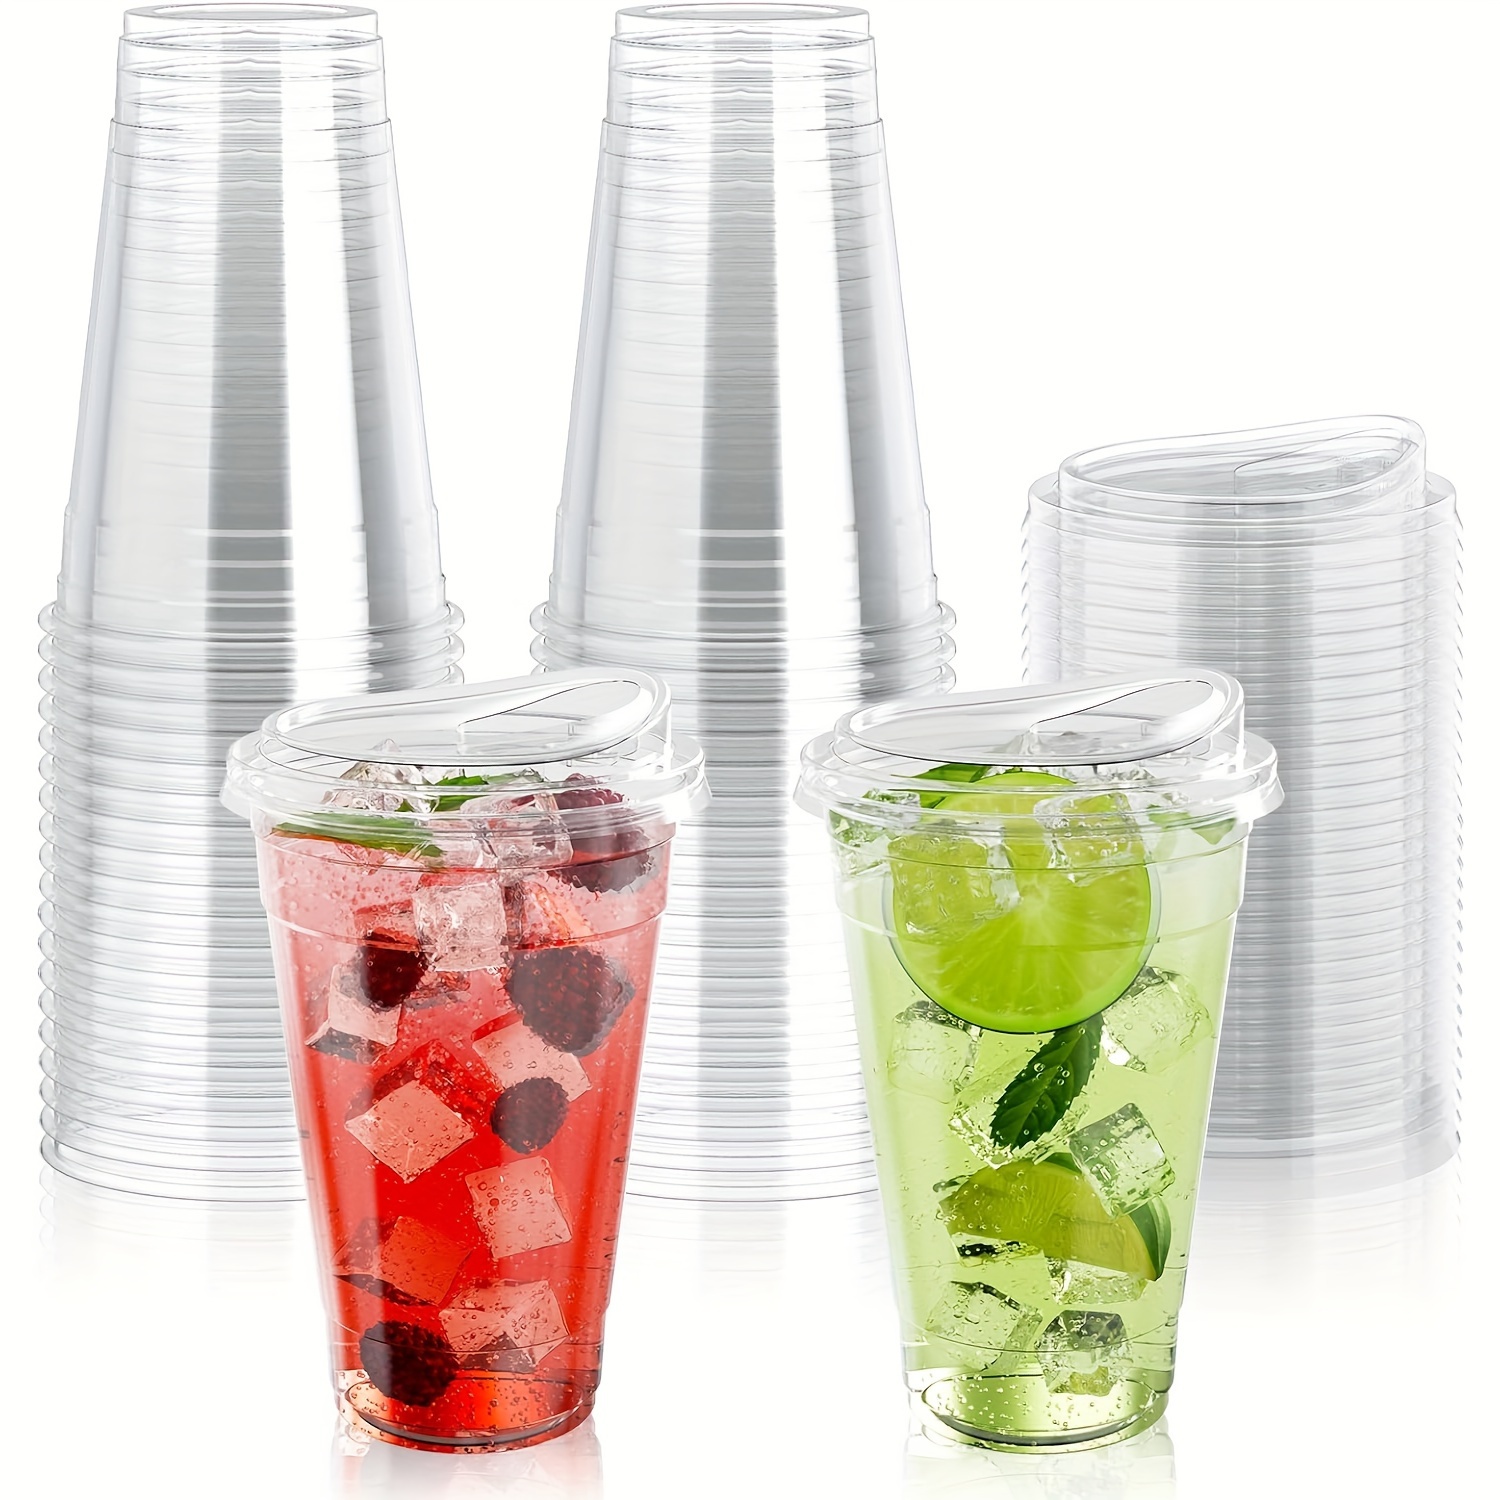 20oz Disposable Clear Plastic Smoothie Cups with Clear Dome Lids